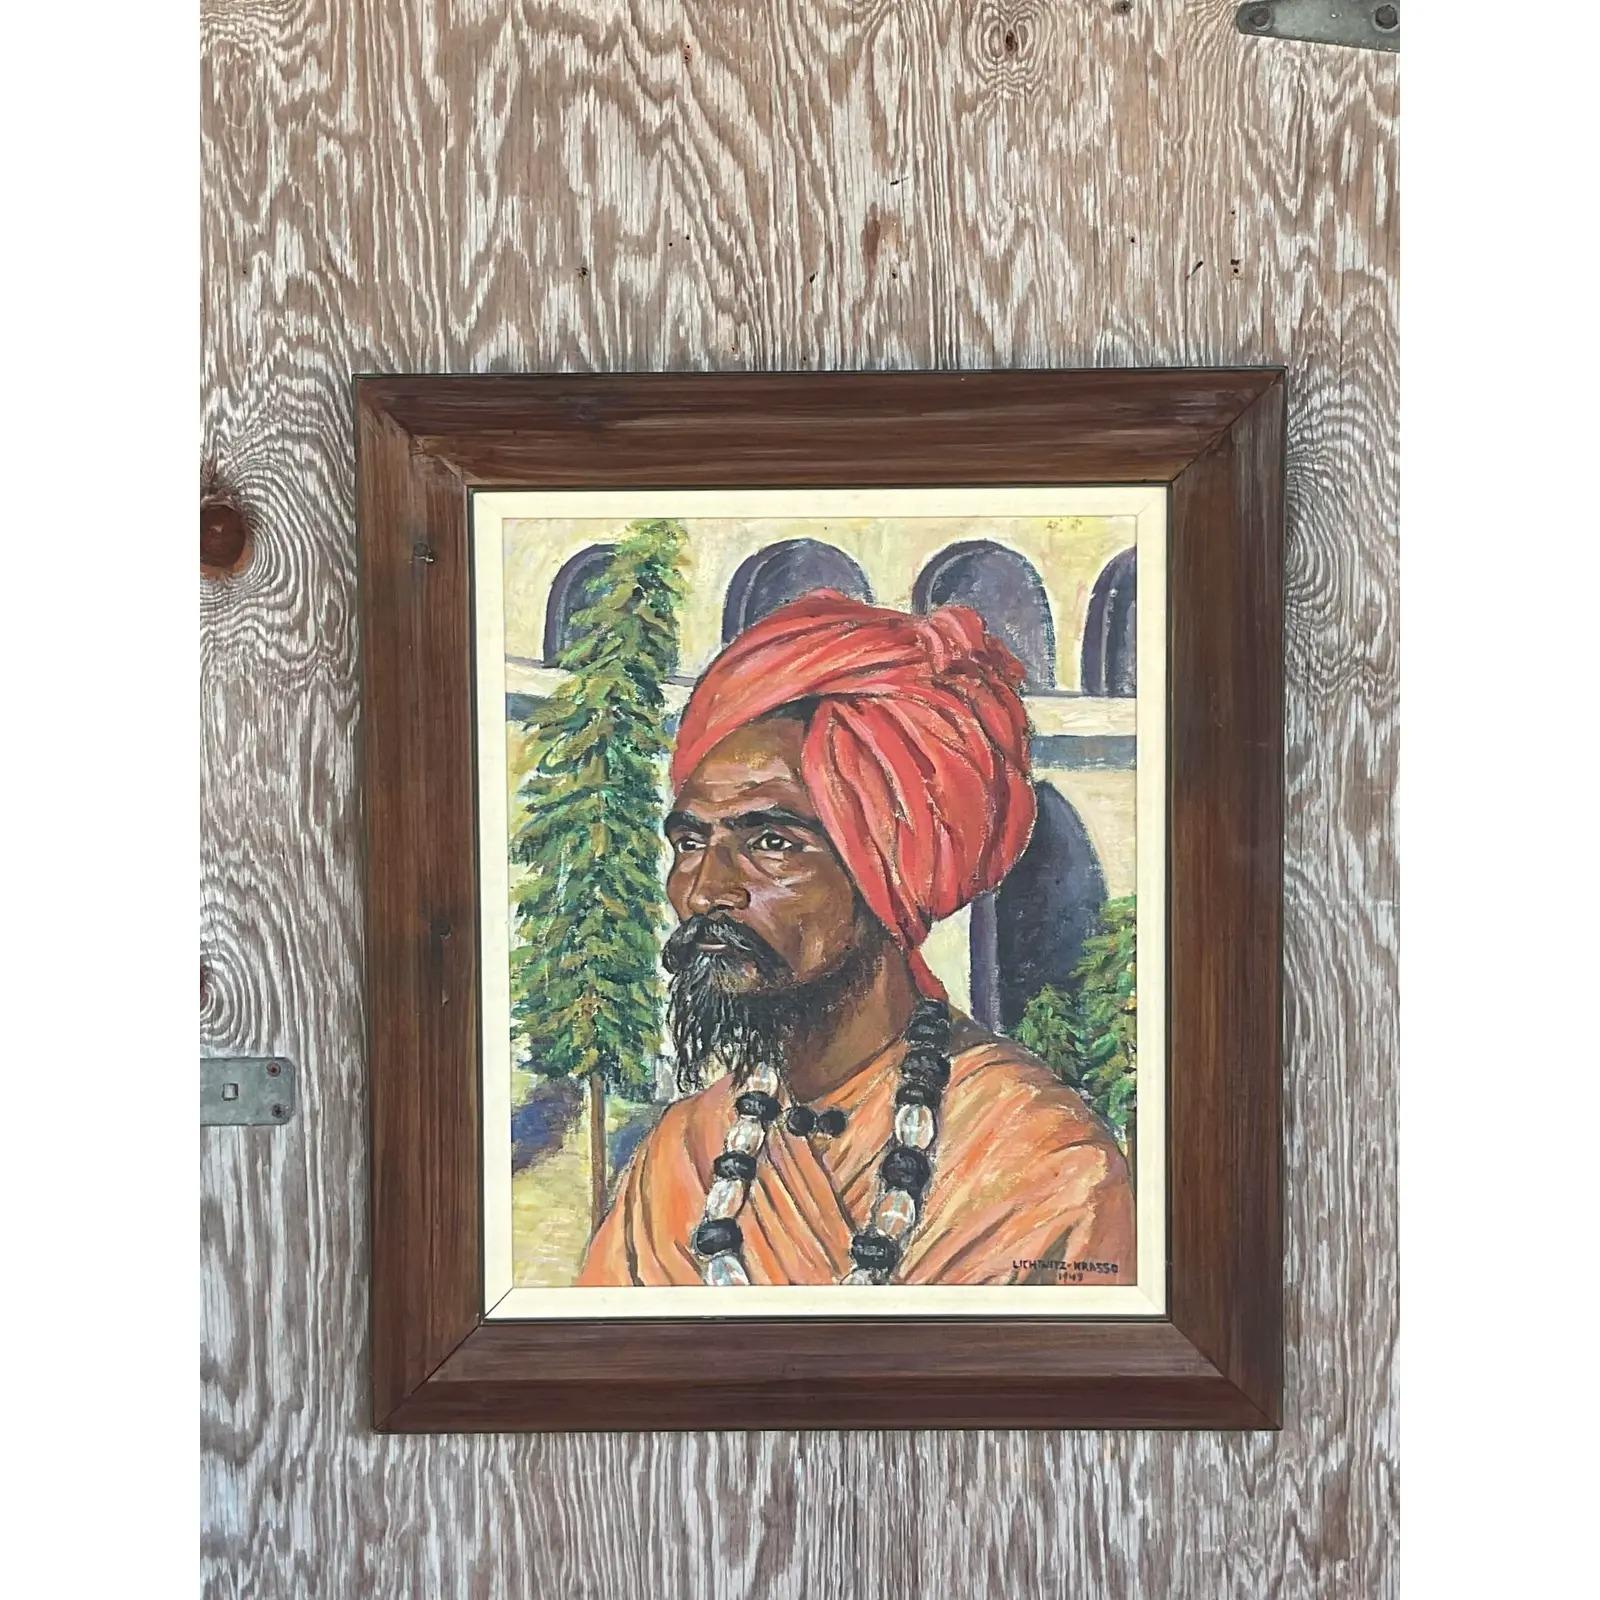 Mid-20th Century Vintage Boho Signed 1941 Original Oil Painting of Man in Turban For Sale